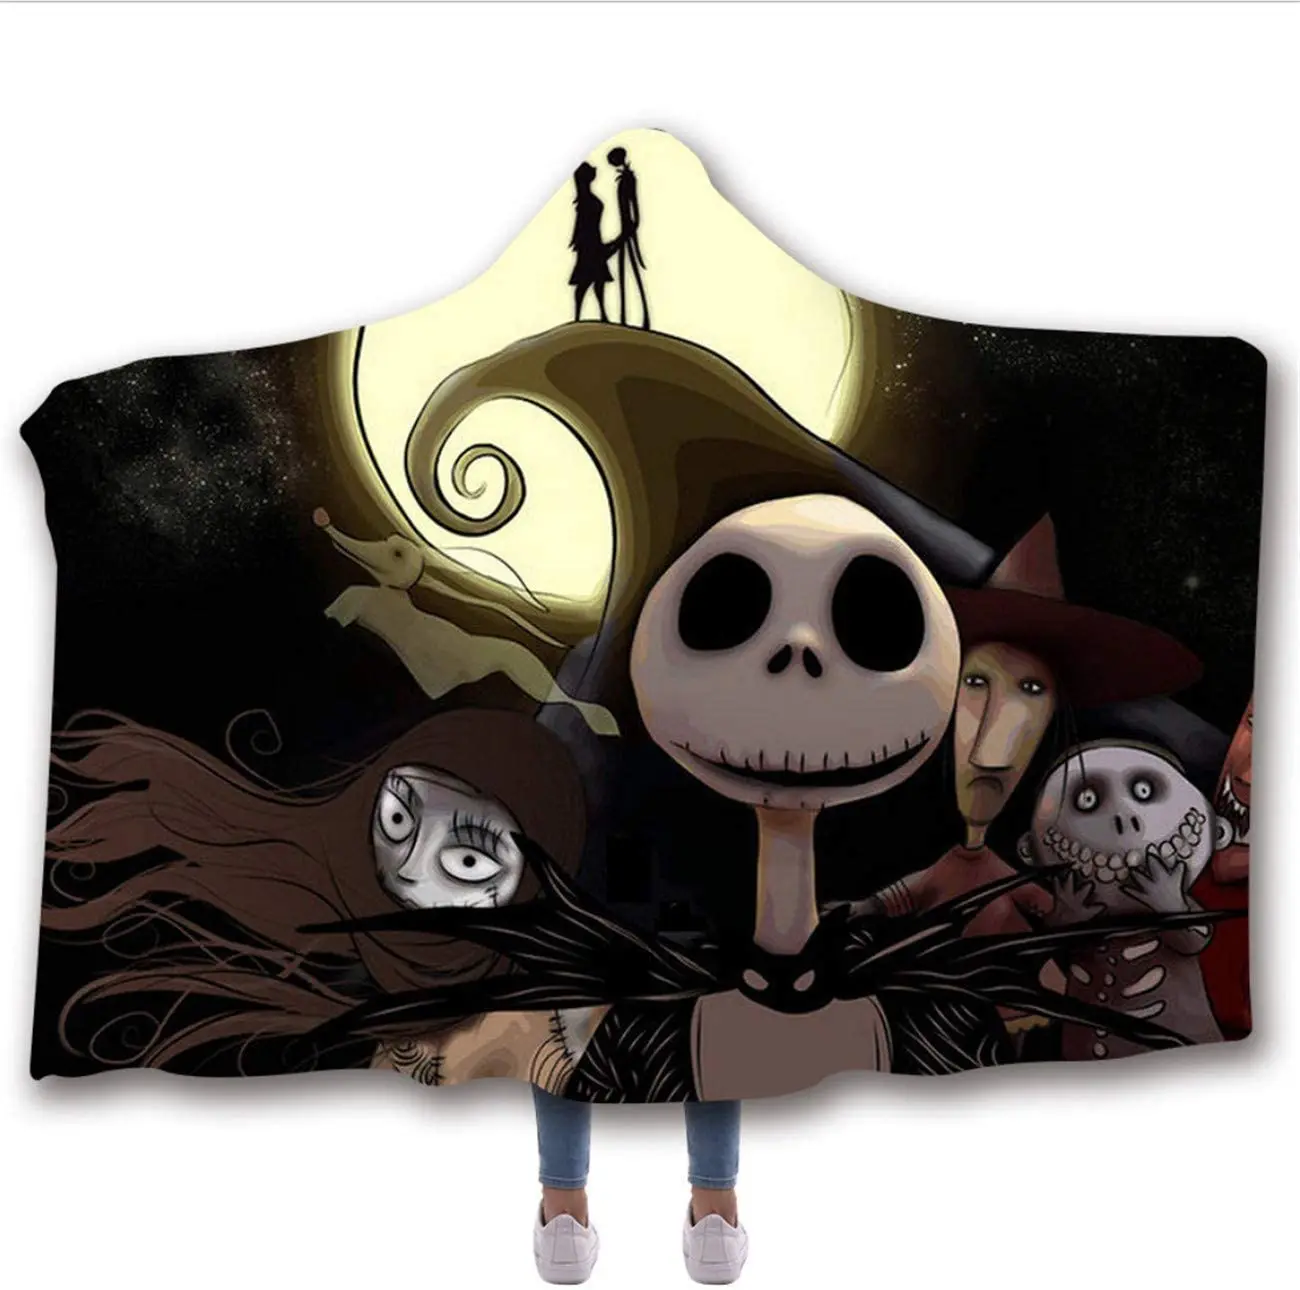 Super Soft Hooded Blanket 3D Nightmare Before Christmas Hooded Blanket Halloween Blanket Warm Wearable Blankets for Kids Adults